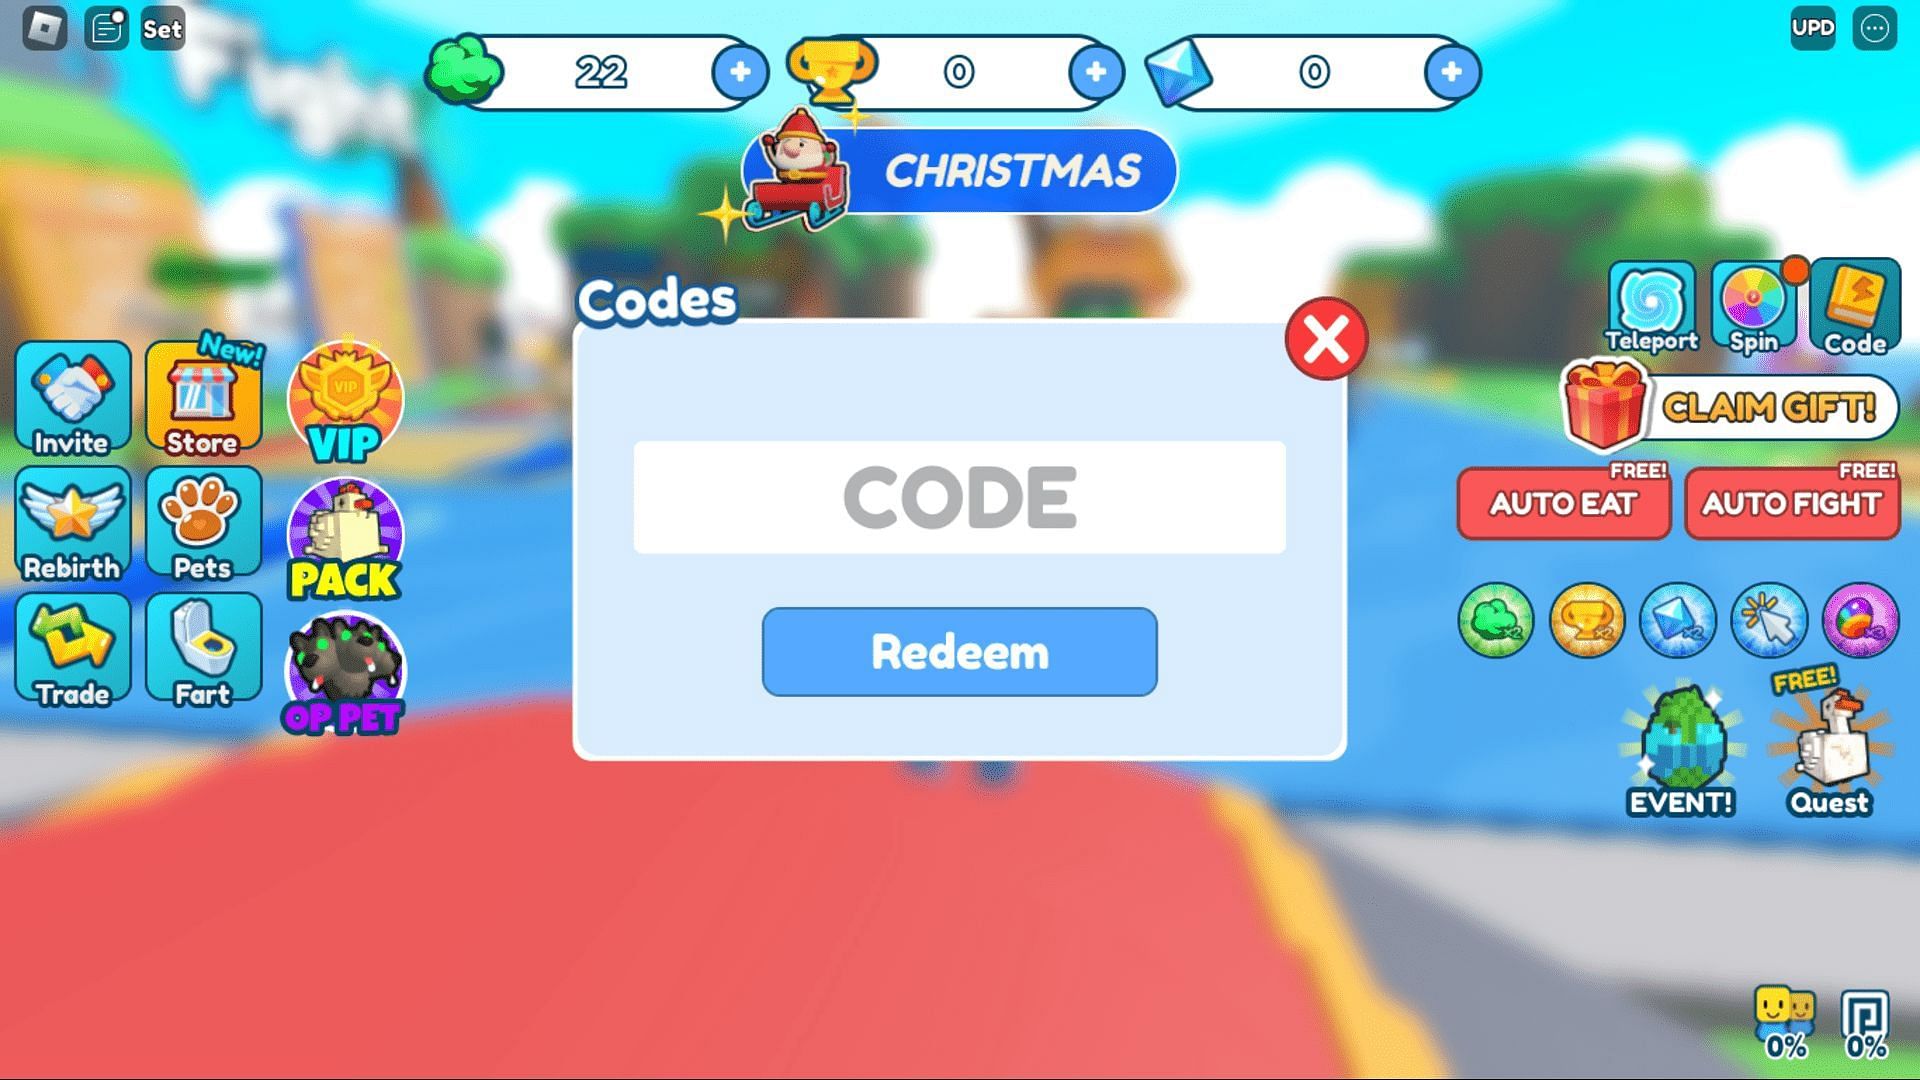 Redeem codes in Fart a Friend with ease (Image via Roblox)